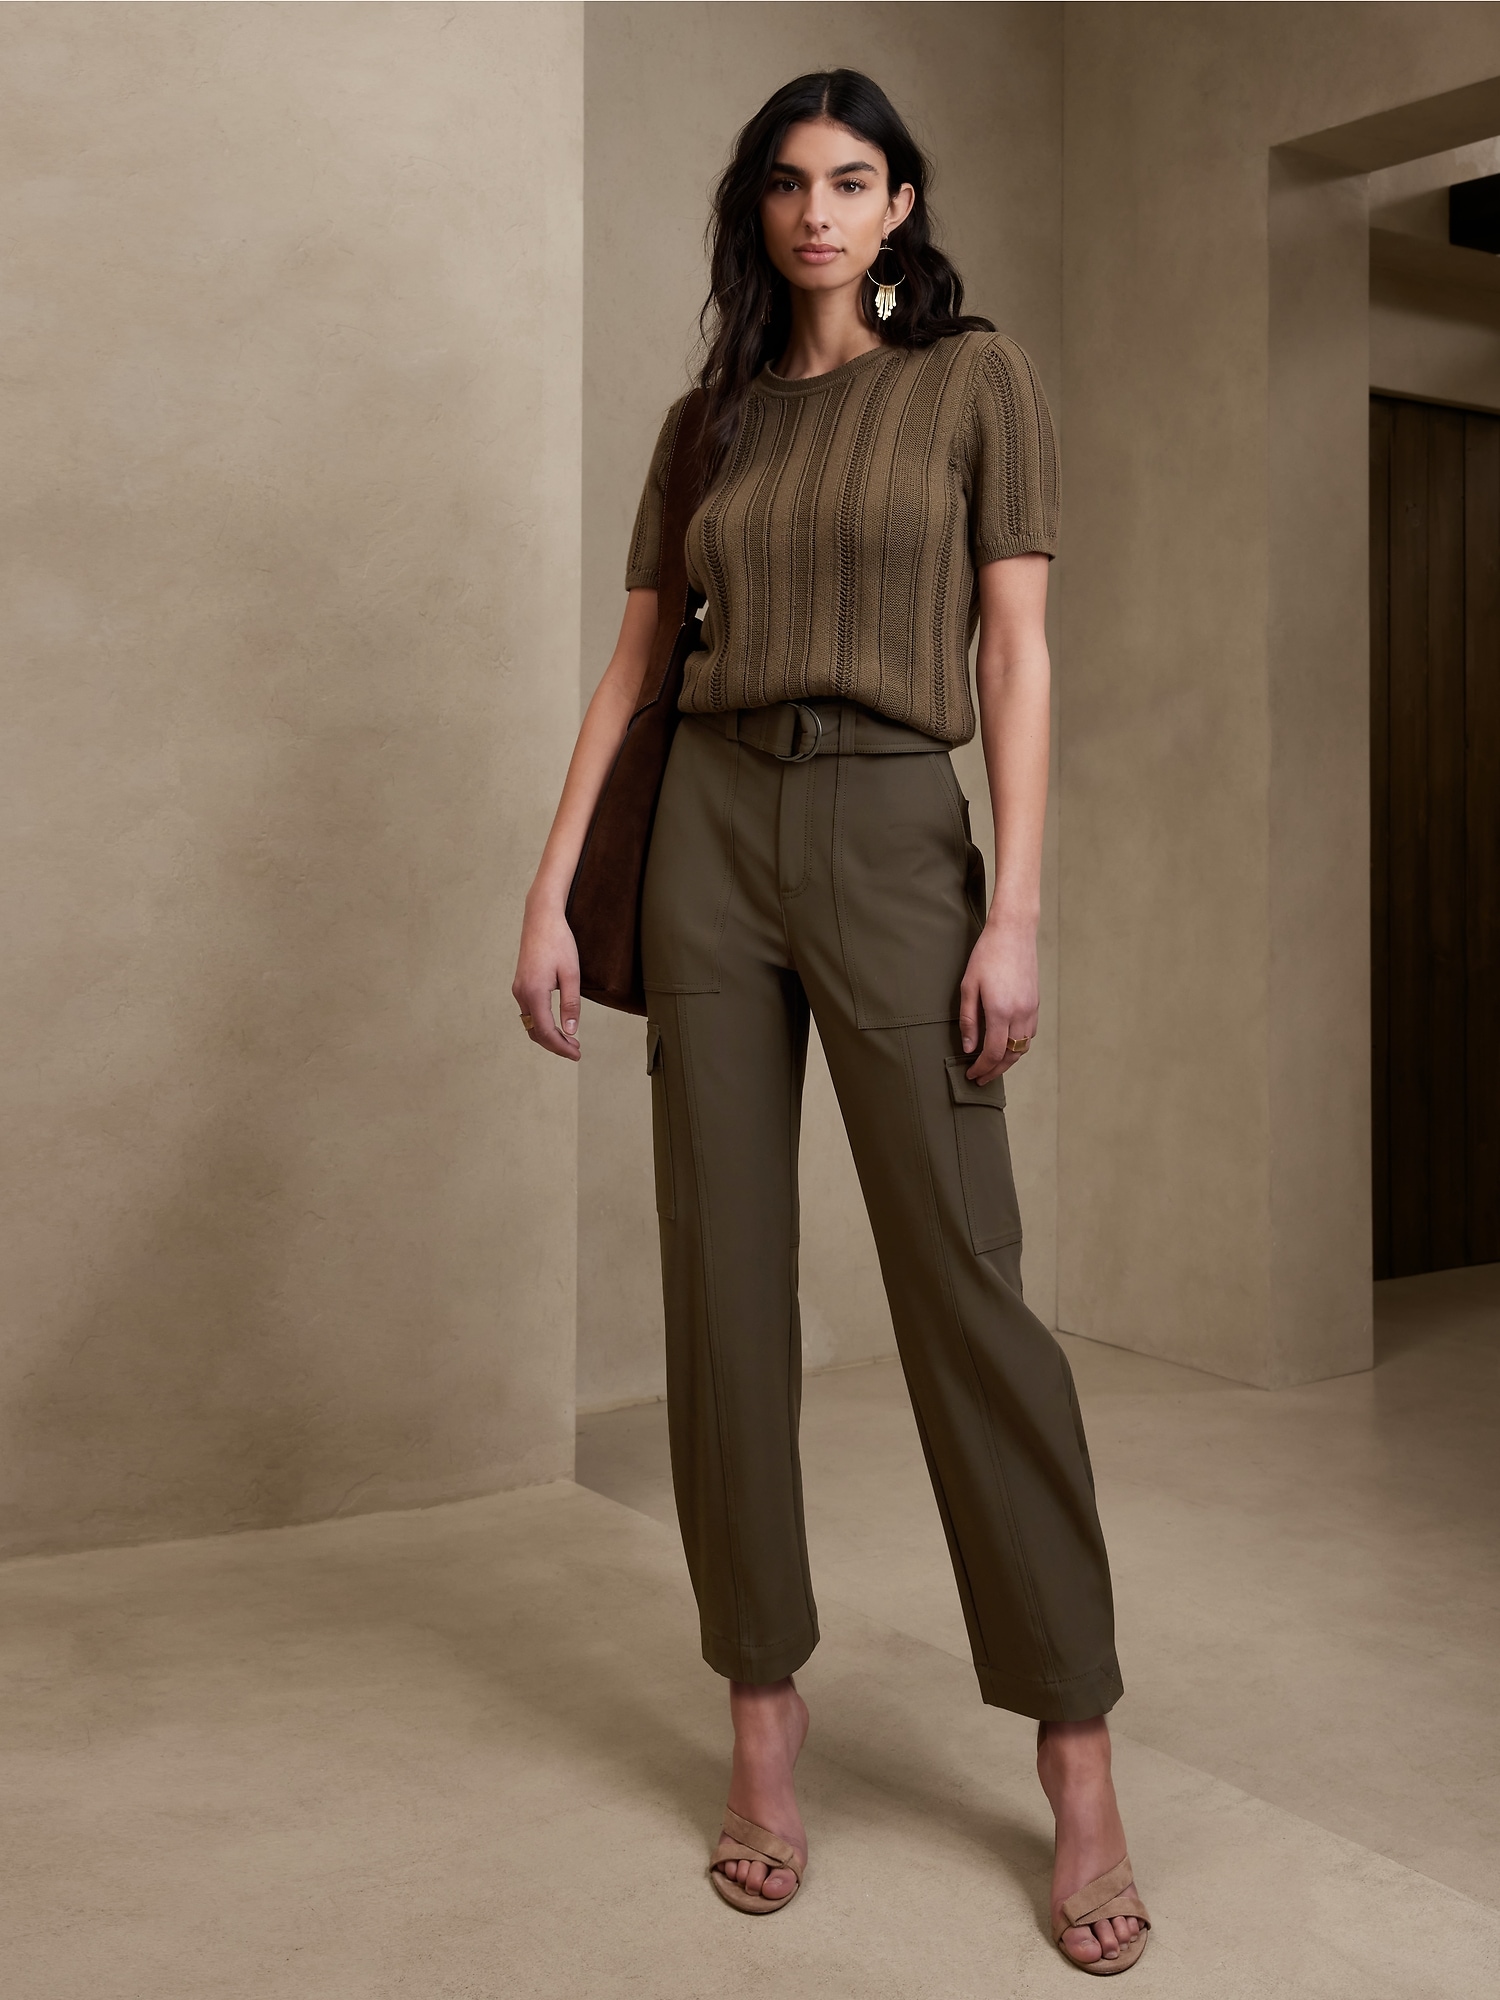 Asos Design Petite Tapered Leather Look Trousers from ASOS on 21 Buttons